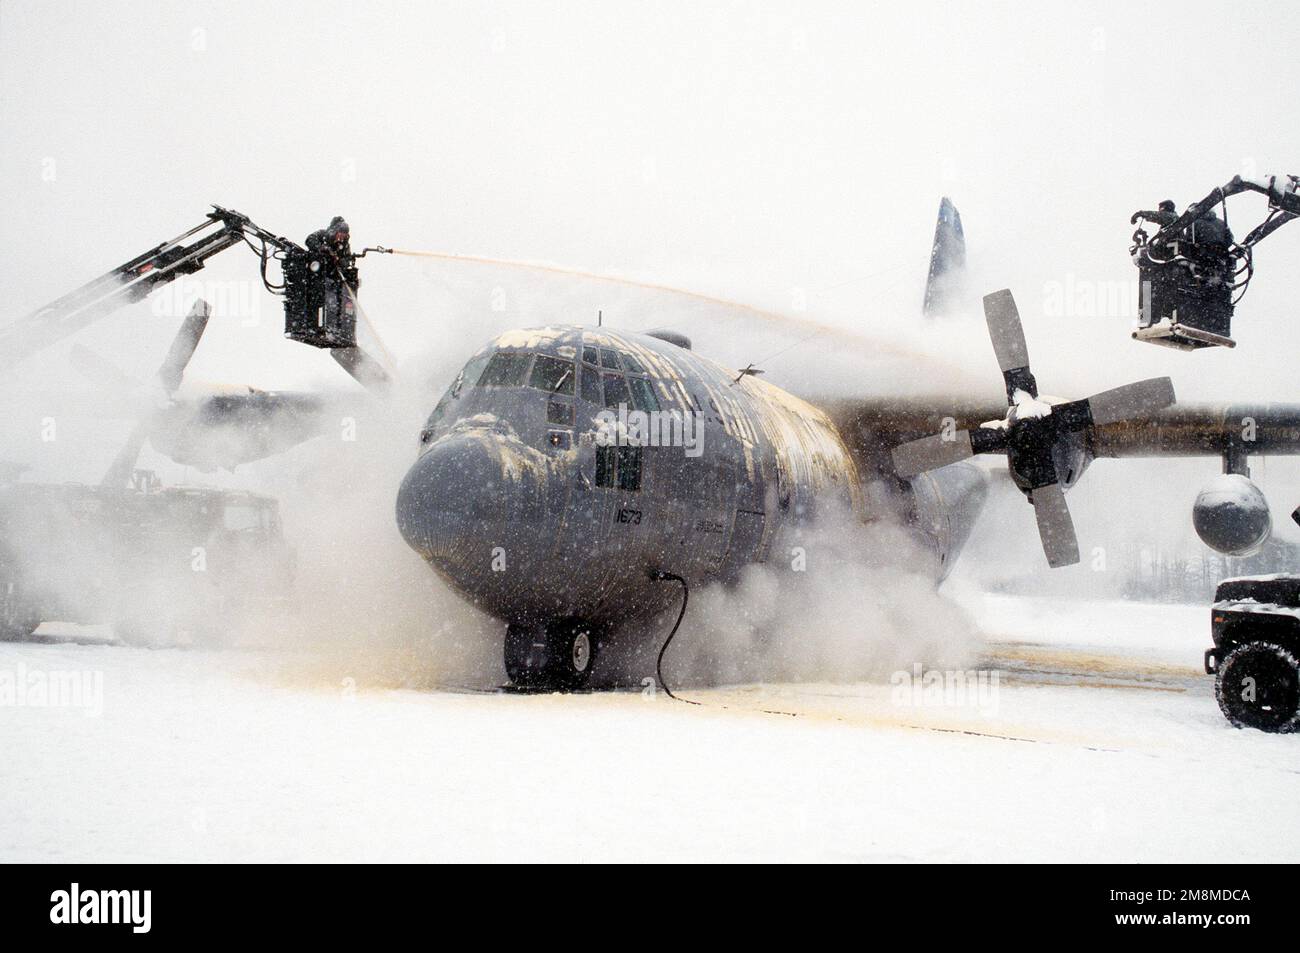 Working under frigid conditions, crew chief and ground support personnel de-ice a 40th Airlift Squadron (AS) C-130H on the snow covered ramp at this United States Air Force Europe (USAFE) base. The 40th AS is assigned to the 7th Wing, Dyess Air Force Base, Texas and is deployed to Ramstein to support Operations Joint Endeavor and Joint Guard from 4 Dec. 1996 to 23 Jan. 1997. Exact Date Shot Unknown. Subject Operation/Series: JOINT ENDEAVORJOINT GUARD Base: Ramstein Air Base State: Rheinland-Pfalz Country: Deutschland / Germany (DEU) Stock Photo